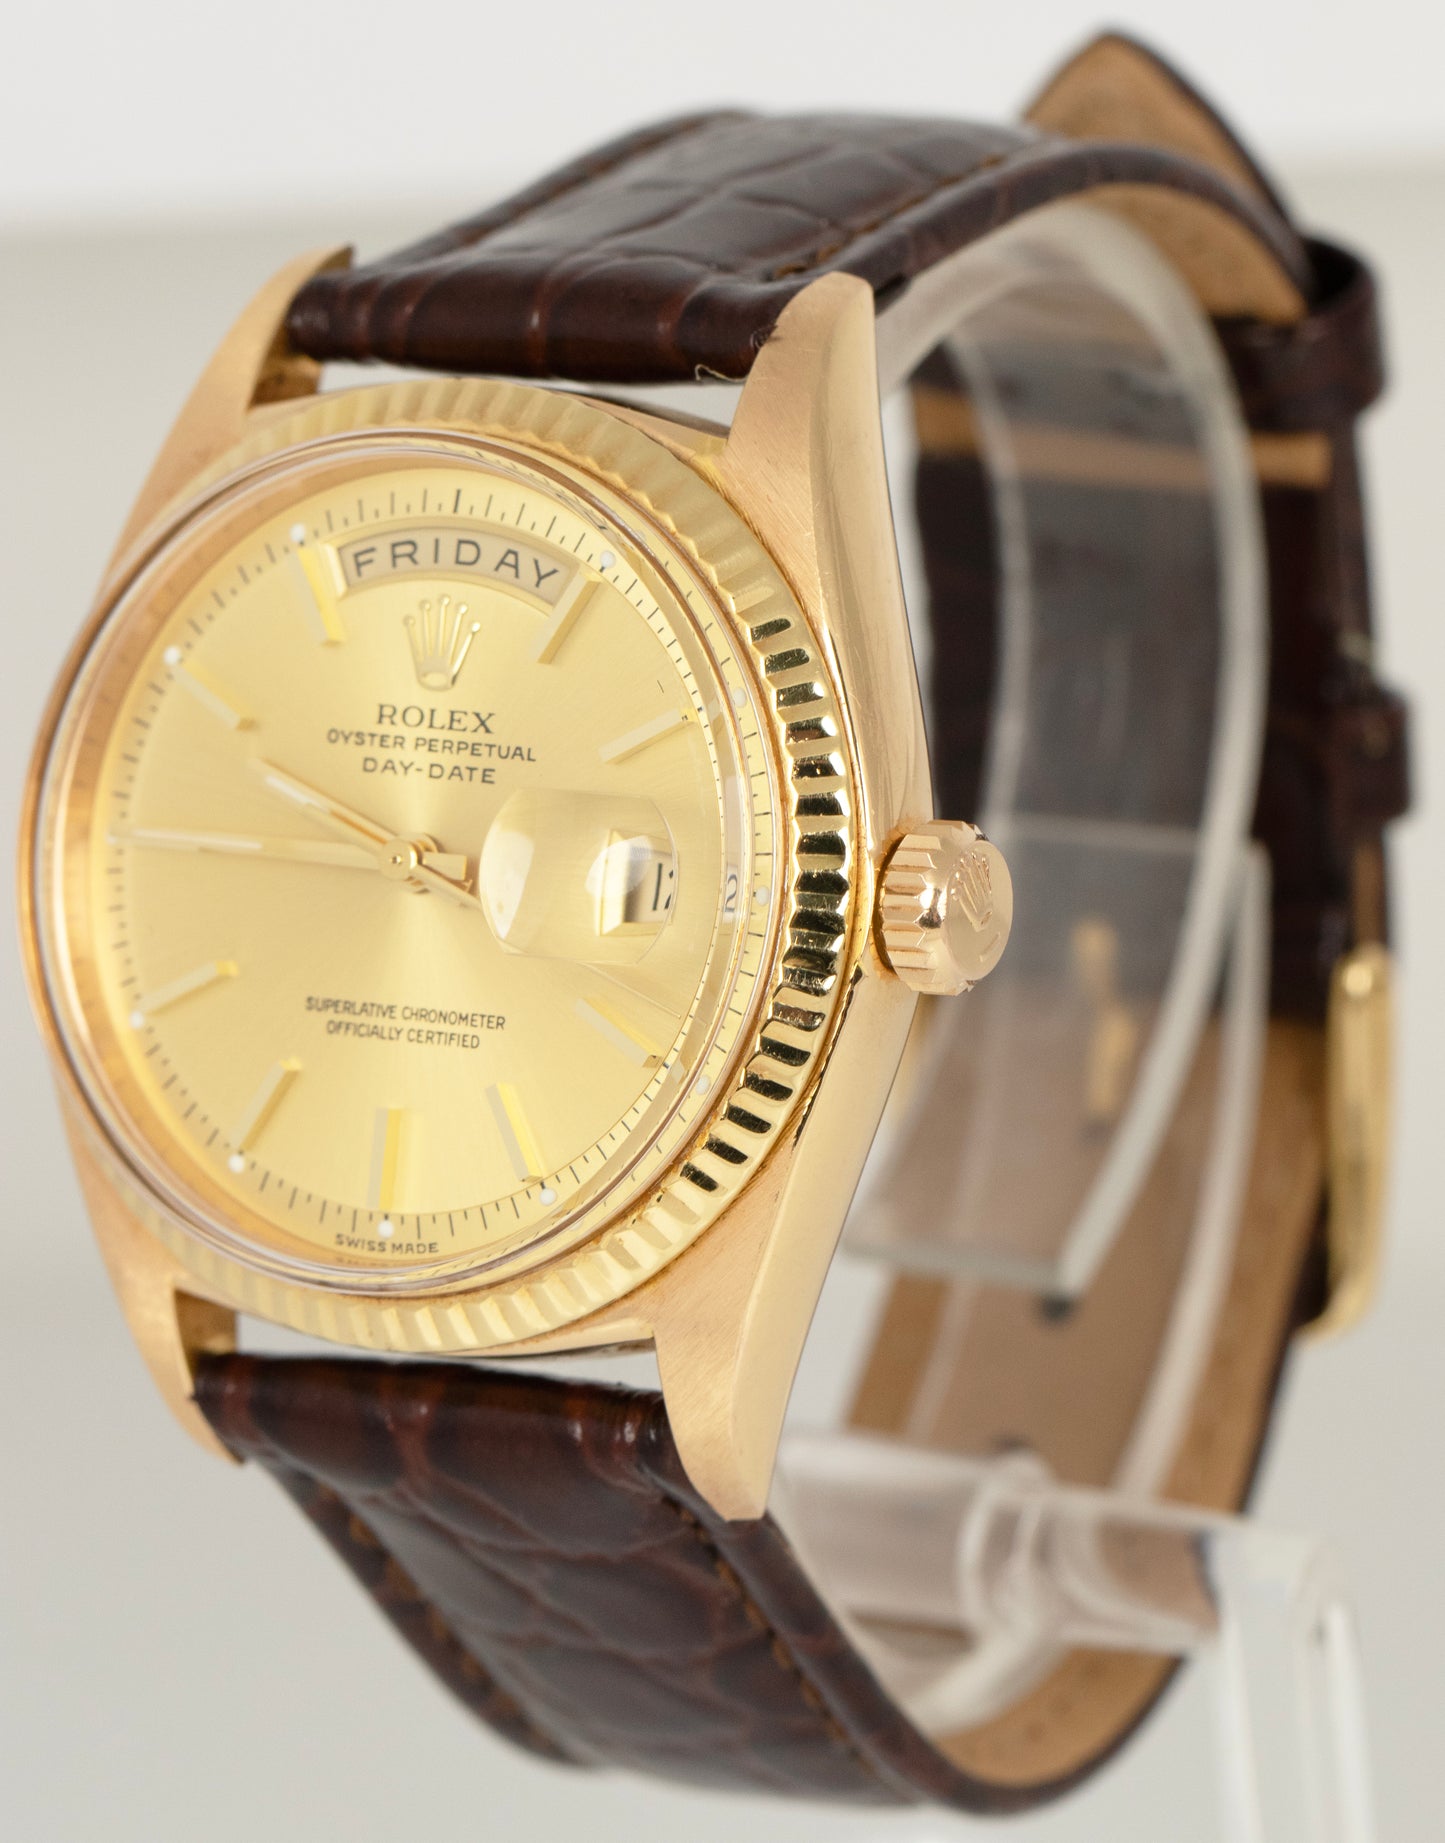 VINTAGE 1960 Rolex Day-Date 36mm Champagne Pie Pan 18K Yellow Gold Watch 1806